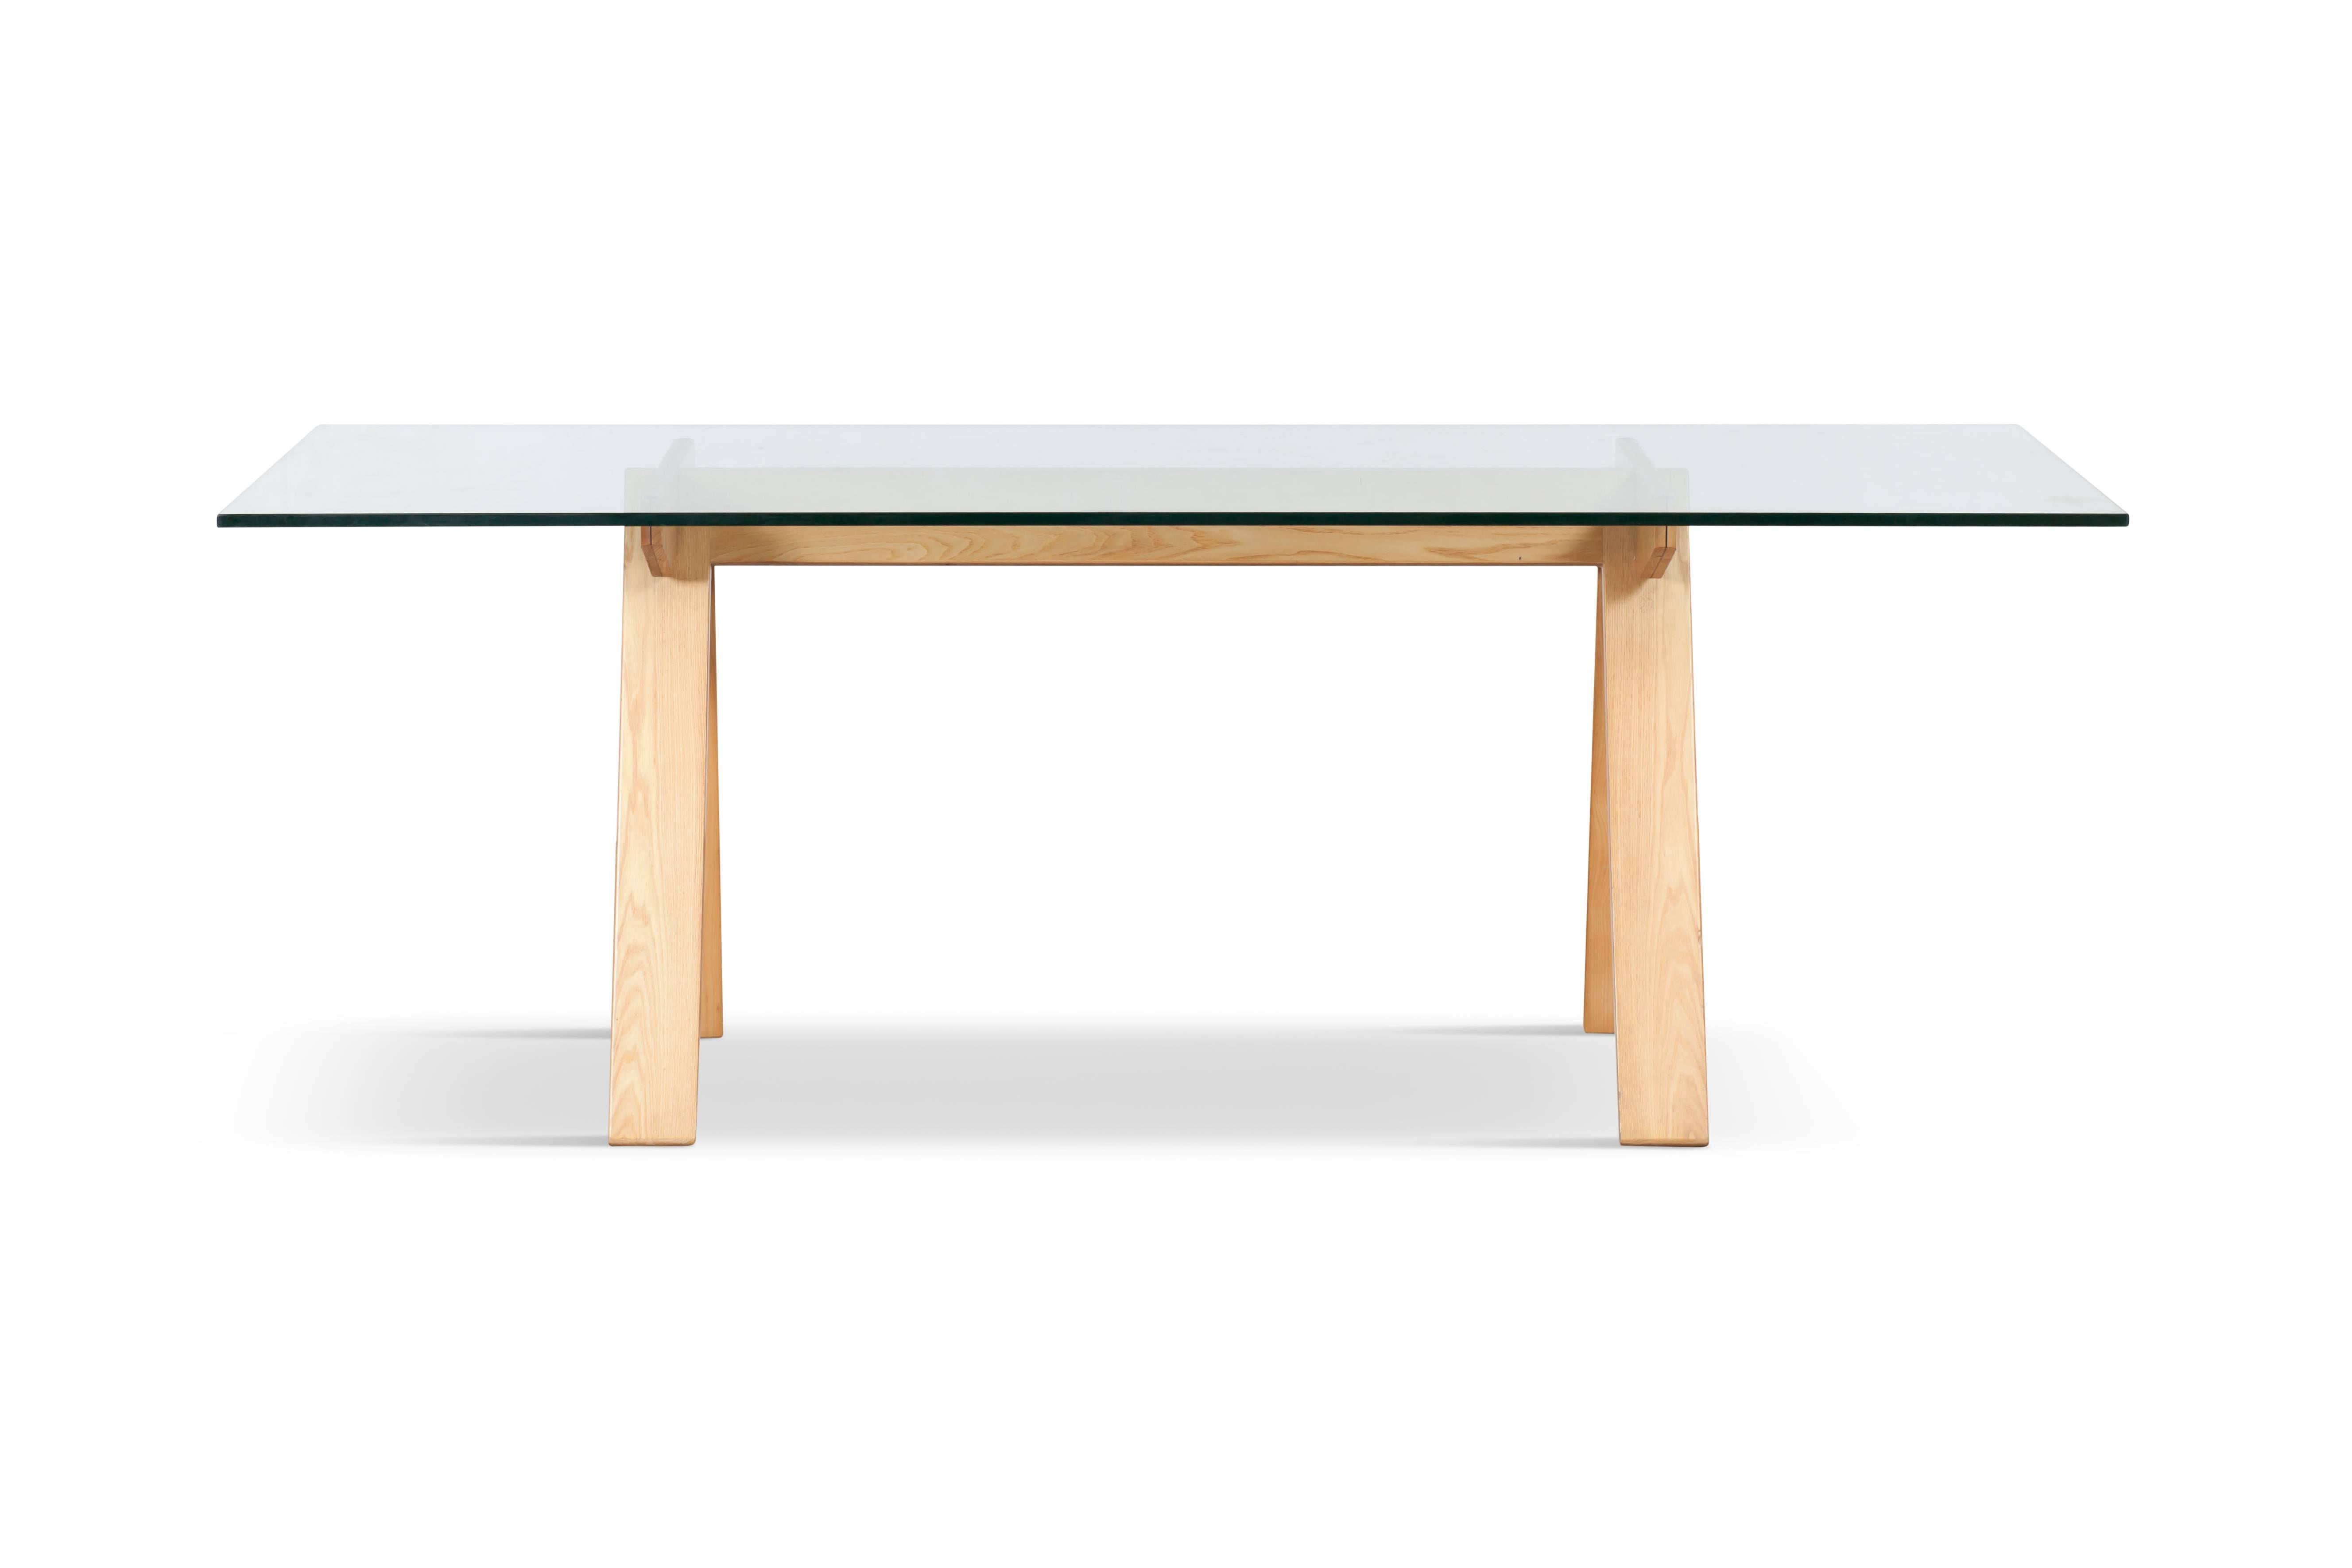 Gigi Sabadin dining table, Emme Italy, 1970s, beechwood 

The table show smart architectural lines and well-considered use of materials, which are clearly visible in the little details.
    

  